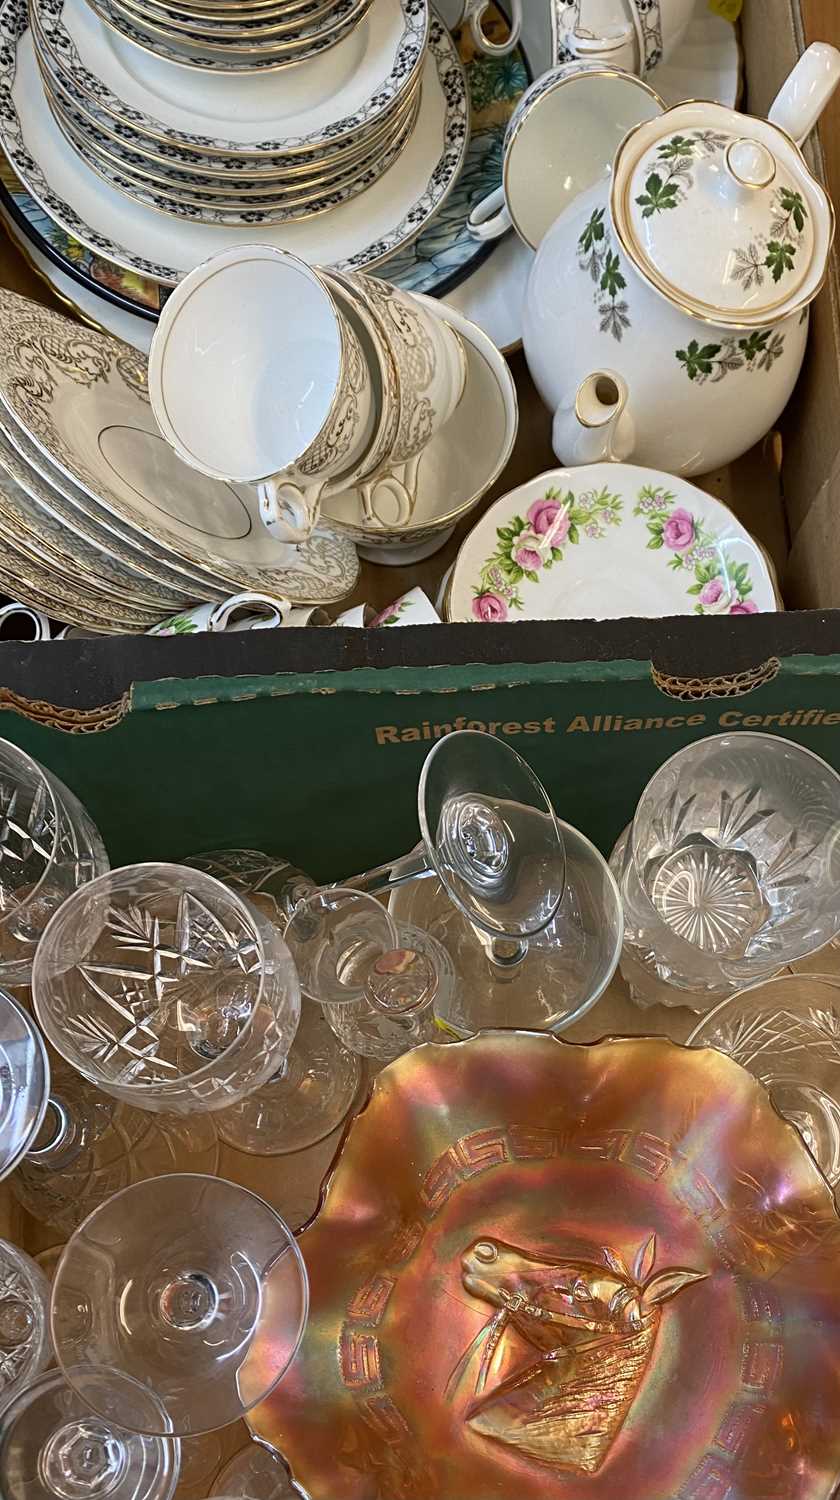 MIXED BONE CHINA TEAWARE, drinking glassware, Carnival glass bowl, ETC, the teaware includes a 21